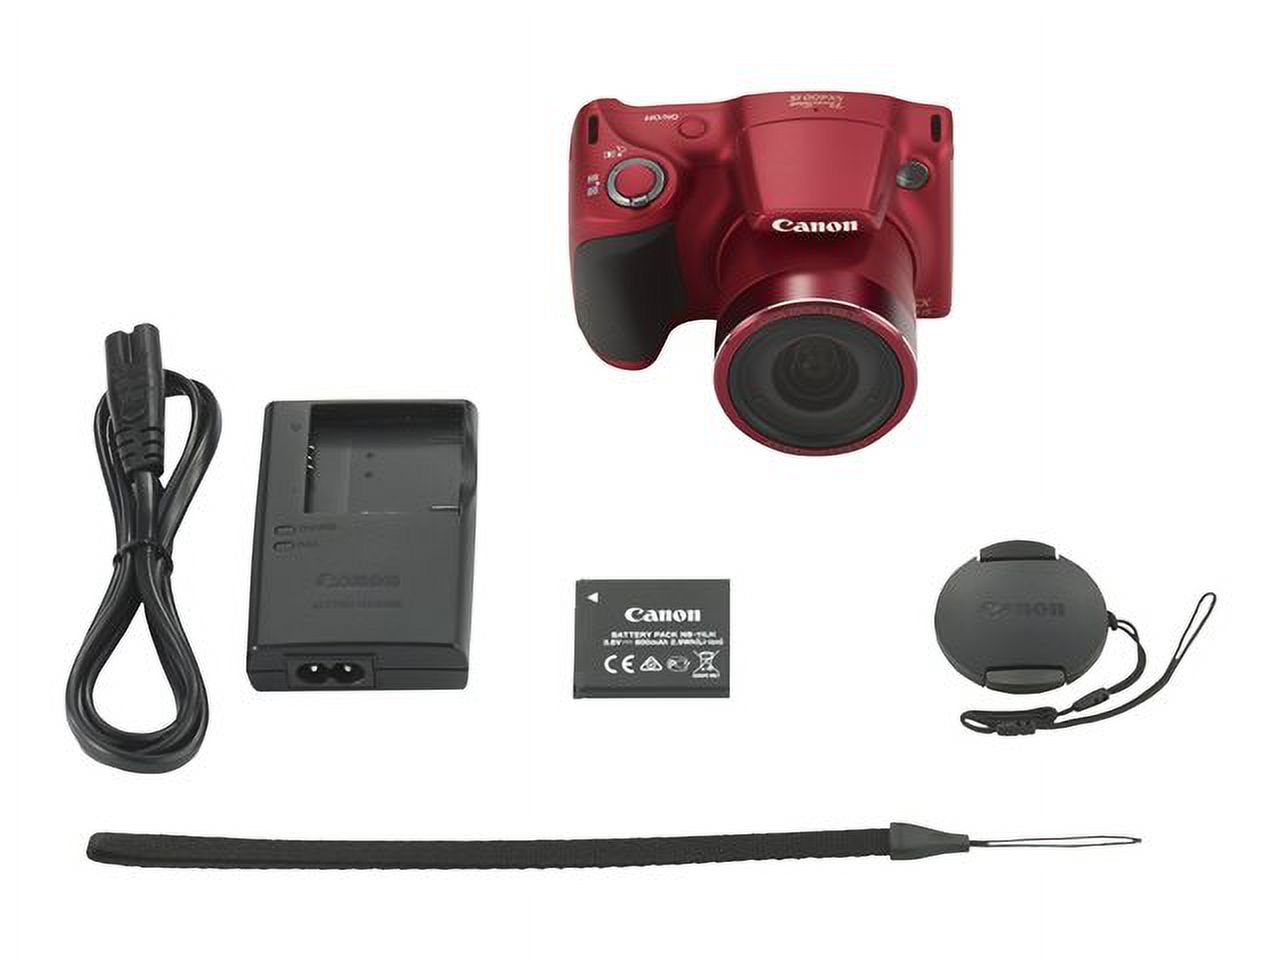 Canon PowerShot SX400 IS - Digital camera - High Definition - compact - 16.0 MP - 30 x optical zoom - red - image 11 of 72